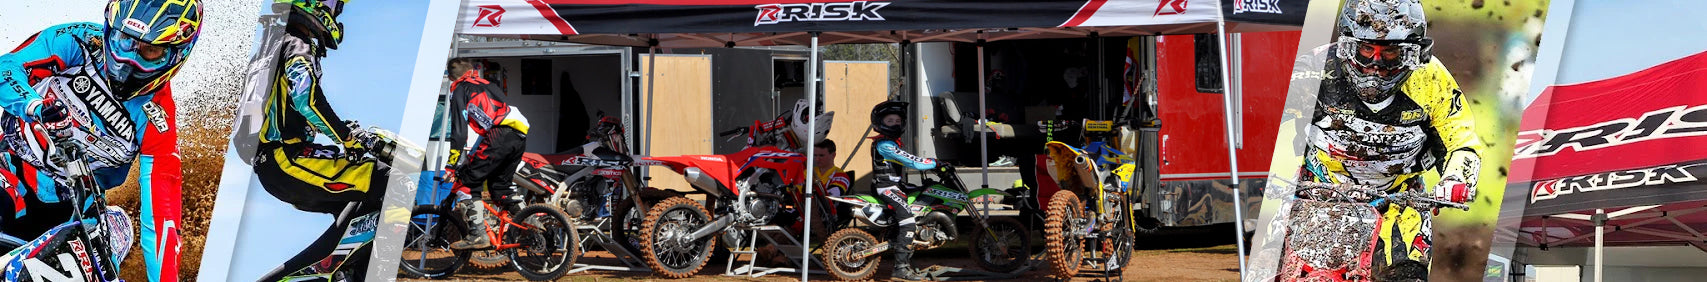 pit setup collection banner featuring moto collage with a Risk Racing pit setup in the middle. It features a factory pit canopy and multiple dirt bikes on stands